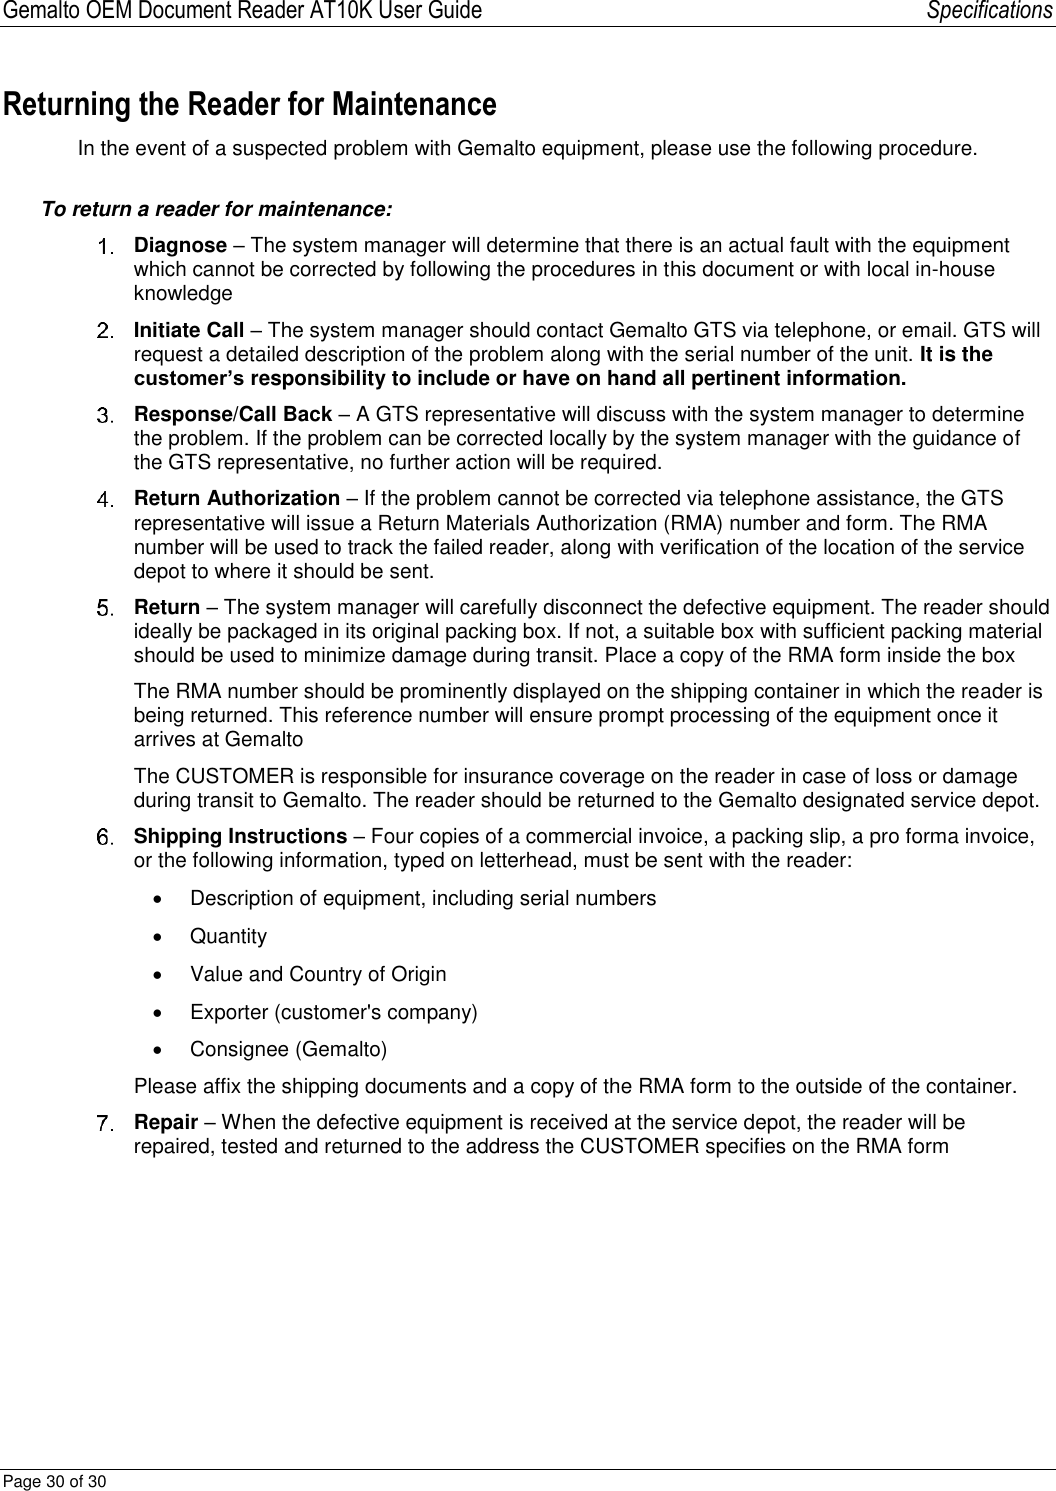 Gemalto OEM Document Reader AT10K User Guide   Specifications Page 30 of 30  Returning the Reader for Maintenance In the event of a suspected problem with Gemalto equipment, please use the following procedure. To return a reader for maintenance:  Diagnose – The system manager will determine that there is an actual fault with the equipment which cannot be corrected by following the procedures in this document or with local in-house knowledge   Initiate Call – The system manager should contact Gemalto GTS via telephone, or email. GTS will request a detailed description of the problem along with the serial number of the unit. It is the customer’s responsibility to include or have on hand all pertinent information.   Response/Call Back – A GTS representative will discuss with the system manager to determine the problem. If the problem can be corrected locally by the system manager with the guidance of the GTS representative, no further action will be required.   Return Authorization – If the problem cannot be corrected via telephone assistance, the GTS representative will issue a Return Materials Authorization (RMA) number and form. The RMA number will be used to track the failed reader, along with verification of the location of the service depot to where it should be sent.   Return – The system manager will carefully disconnect the defective equipment. The reader should ideally be packaged in its original packing box. If not, a suitable box with sufficient packing material should be used to minimize damage during transit. Place a copy of the RMA form inside the box  The RMA number should be prominently displayed on the shipping container in which the reader is being returned. This reference number will ensure prompt processing of the equipment once it arrives at Gemalto  The CUSTOMER is responsible for insurance coverage on the reader in case of loss or damage during transit to Gemalto. The reader should be returned to the Gemalto designated service depot.  Shipping Instructions – Four copies of a commercial invoice, a packing slip, a pro forma invoice, or the following information, typed on letterhead, must be sent with the reader:   Description of equipment, including serial numbers   Quantity   Value and Country of Origin   Exporter (customer&apos;s company)   Consignee (Gemalto) Please affix the shipping documents and a copy of the RMA form to the outside of the container.  Repair – When the defective equipment is received at the service depot, the reader will be repaired, tested and returned to the address the CUSTOMER specifies on the RMA form   